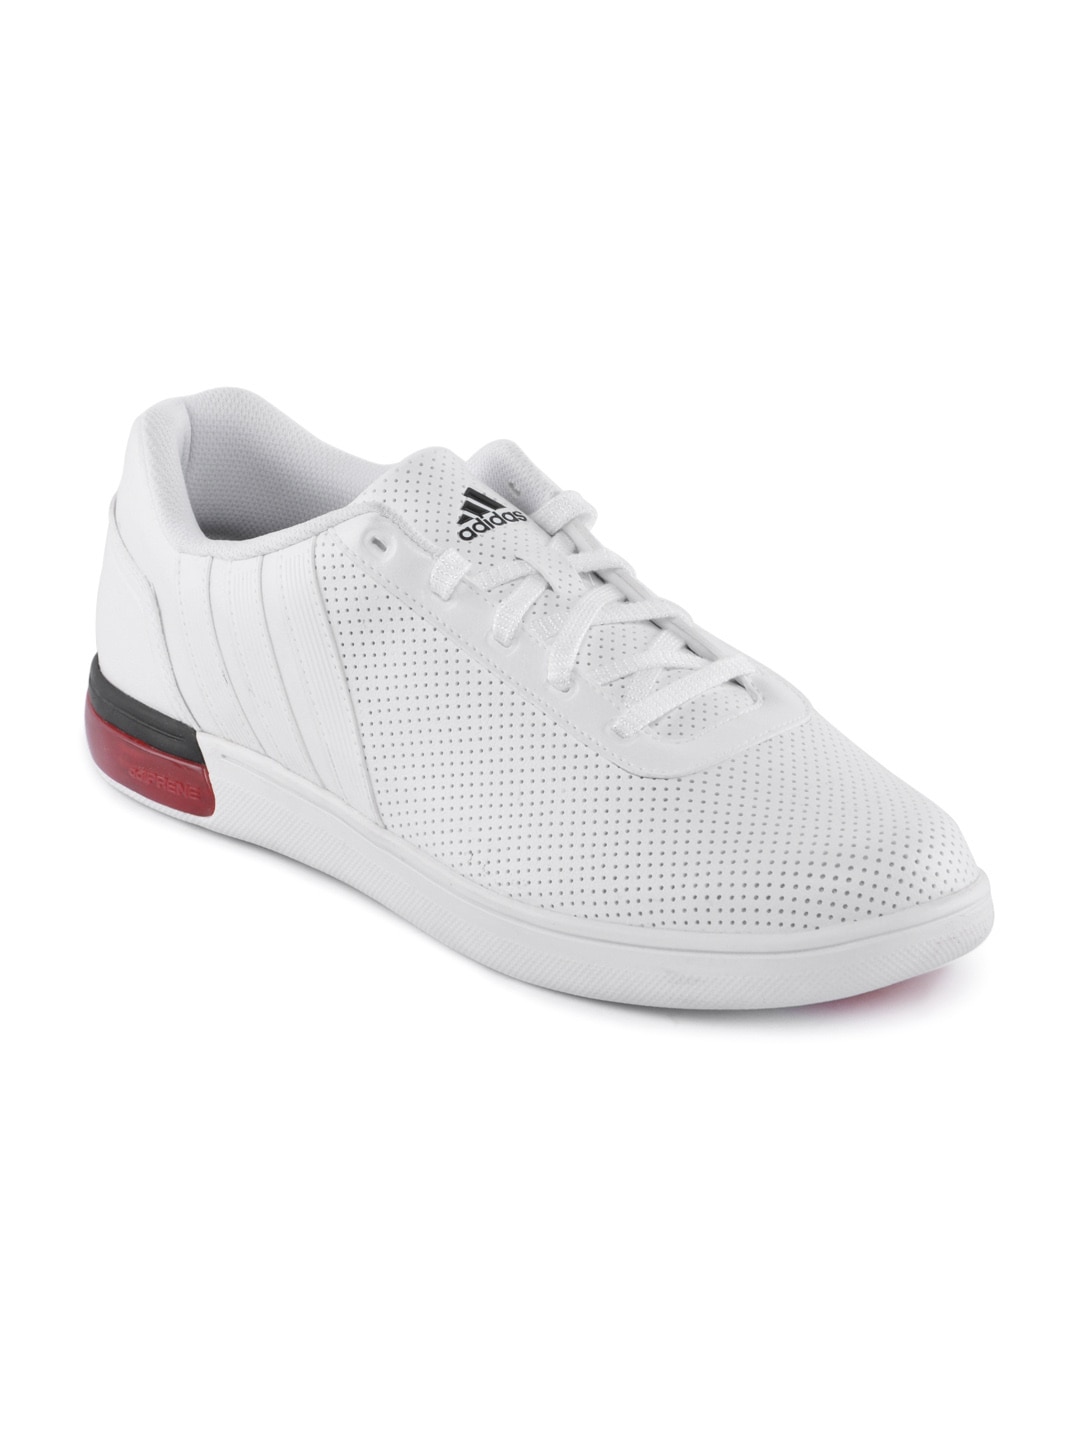 ADIDAS Men White Snipe Lo Casual Shoes